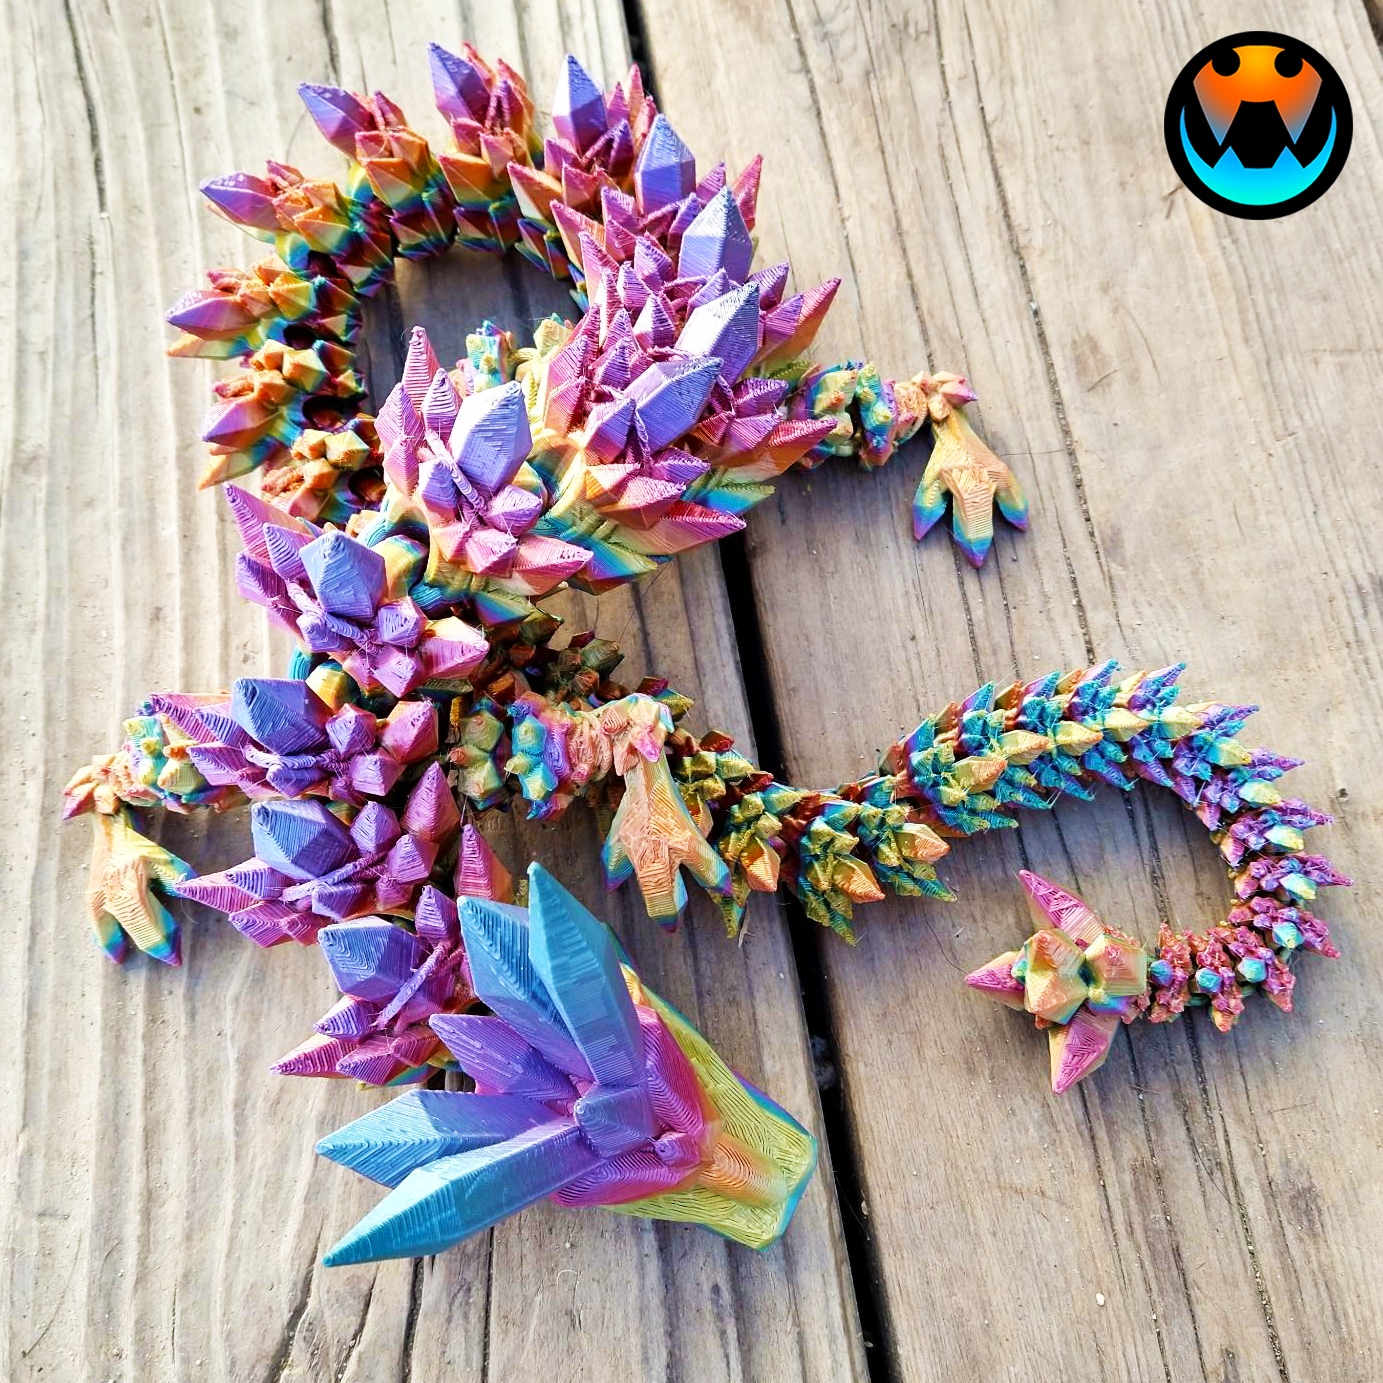 signal-2022-01-17-hfh115203_002.png Download file Crystal Dragon, Articulating Flexi Wiggle Pet, Print in Place, Fantasy • Model to 3D print, Cinderwing3D